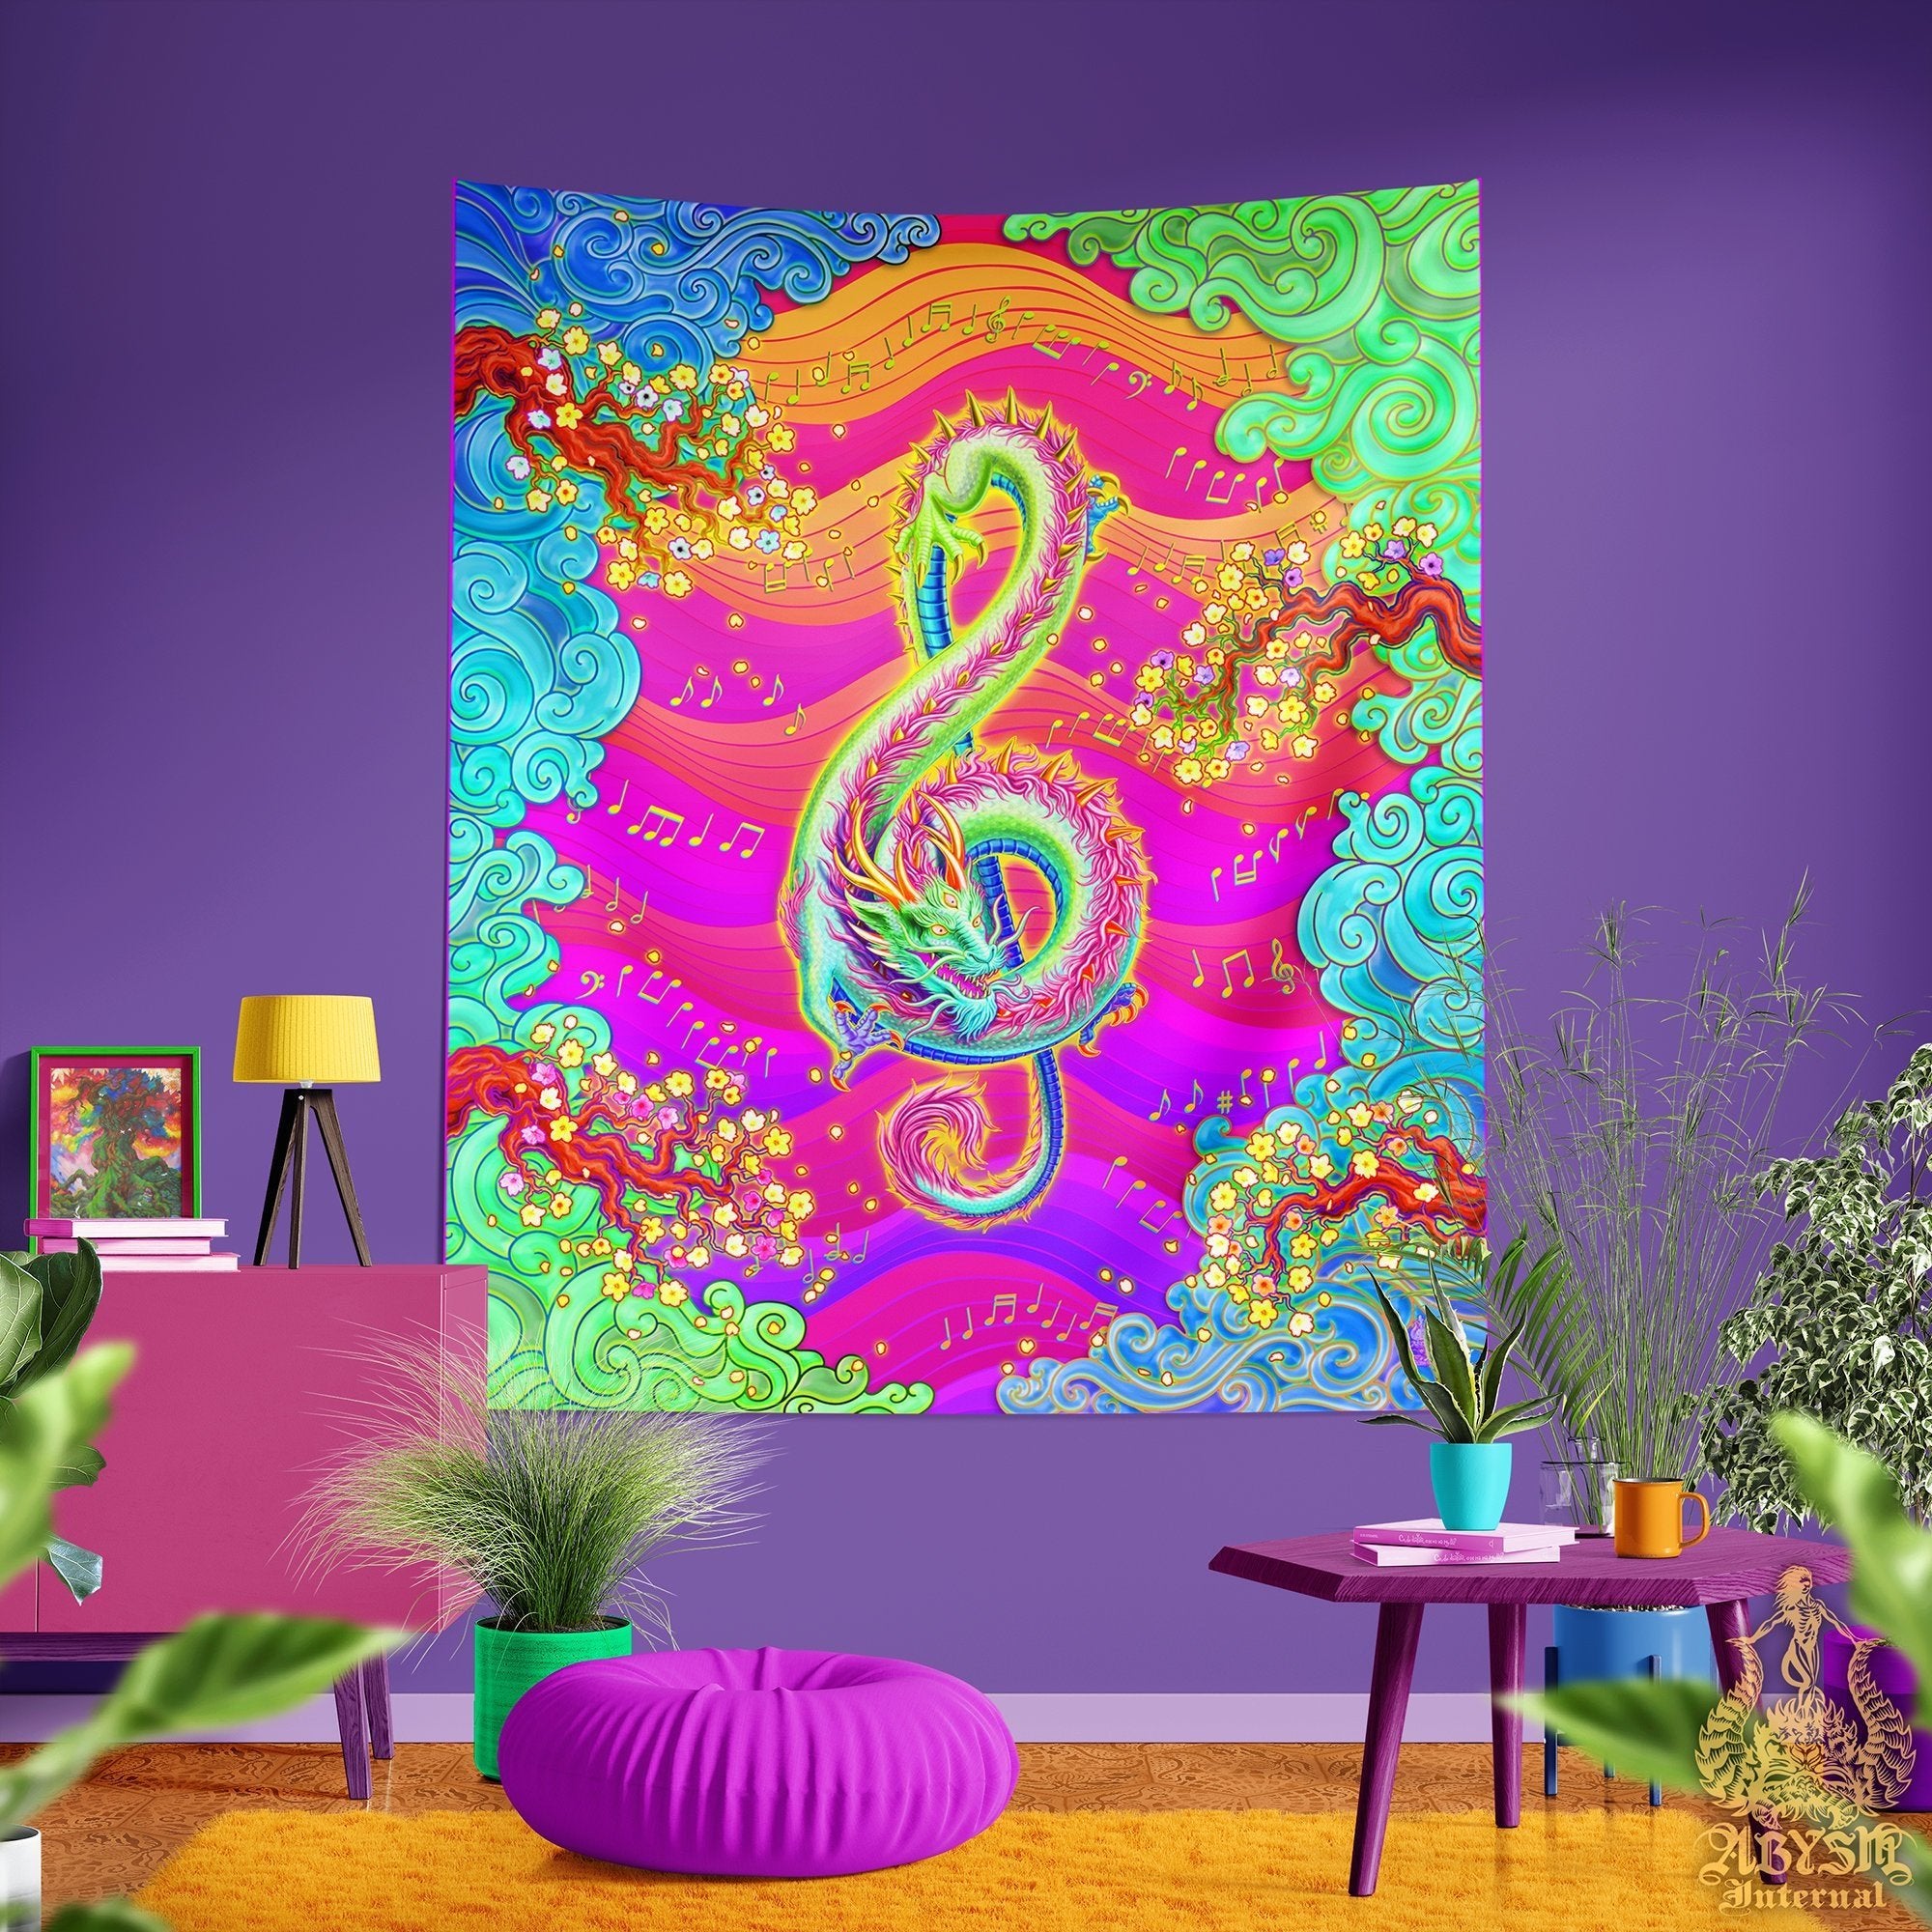 Psychedelic Tapestry, Trippy Wall Hanging, Eclectic Music Home Decor, Art Print - Kidcore, Neon Dragon, Treble Clef - Abysm Internal